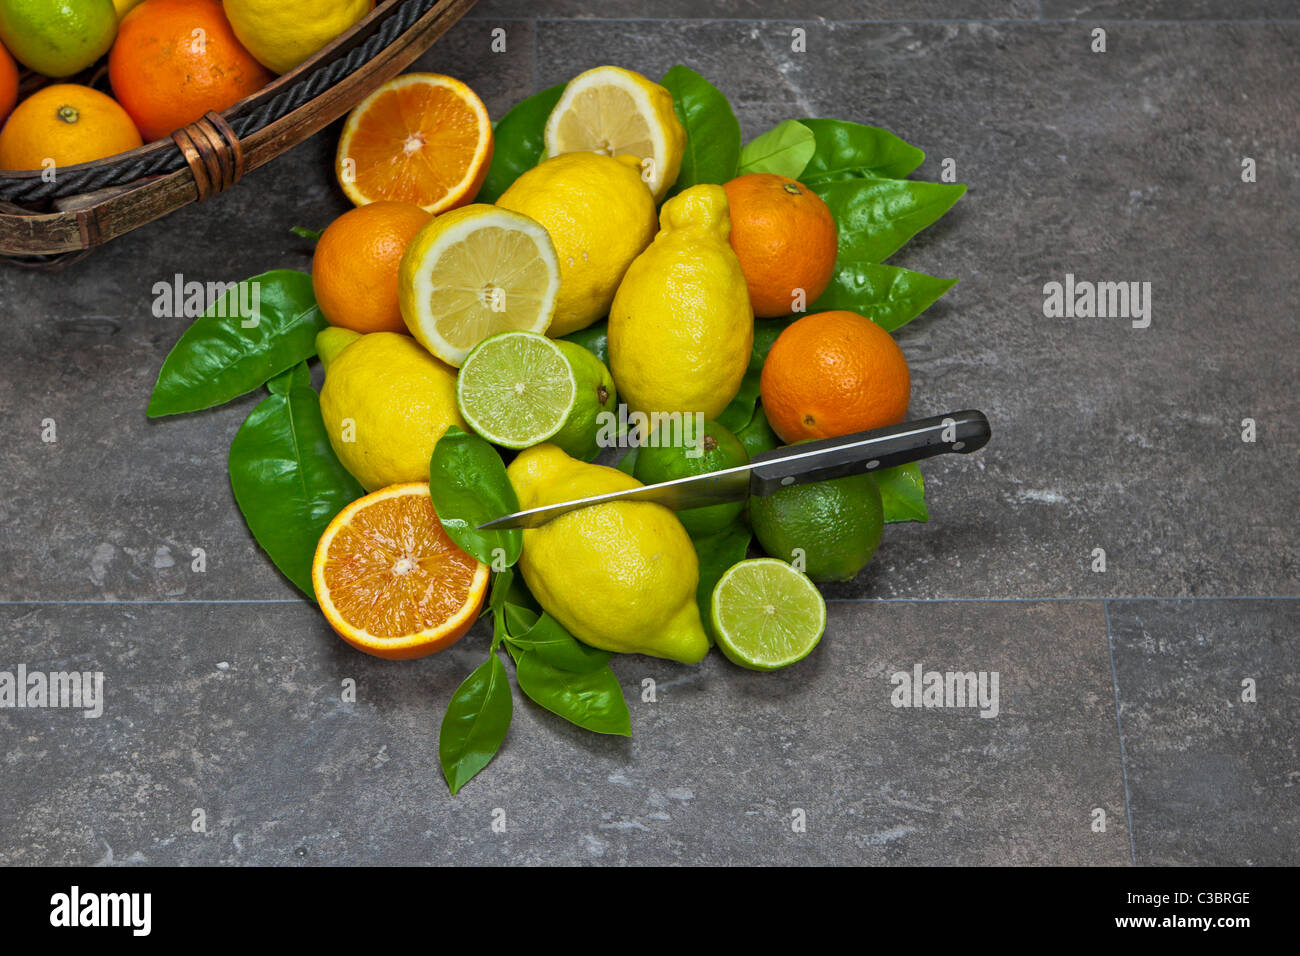 assortment with citrus fruits in a basket Stock Photo